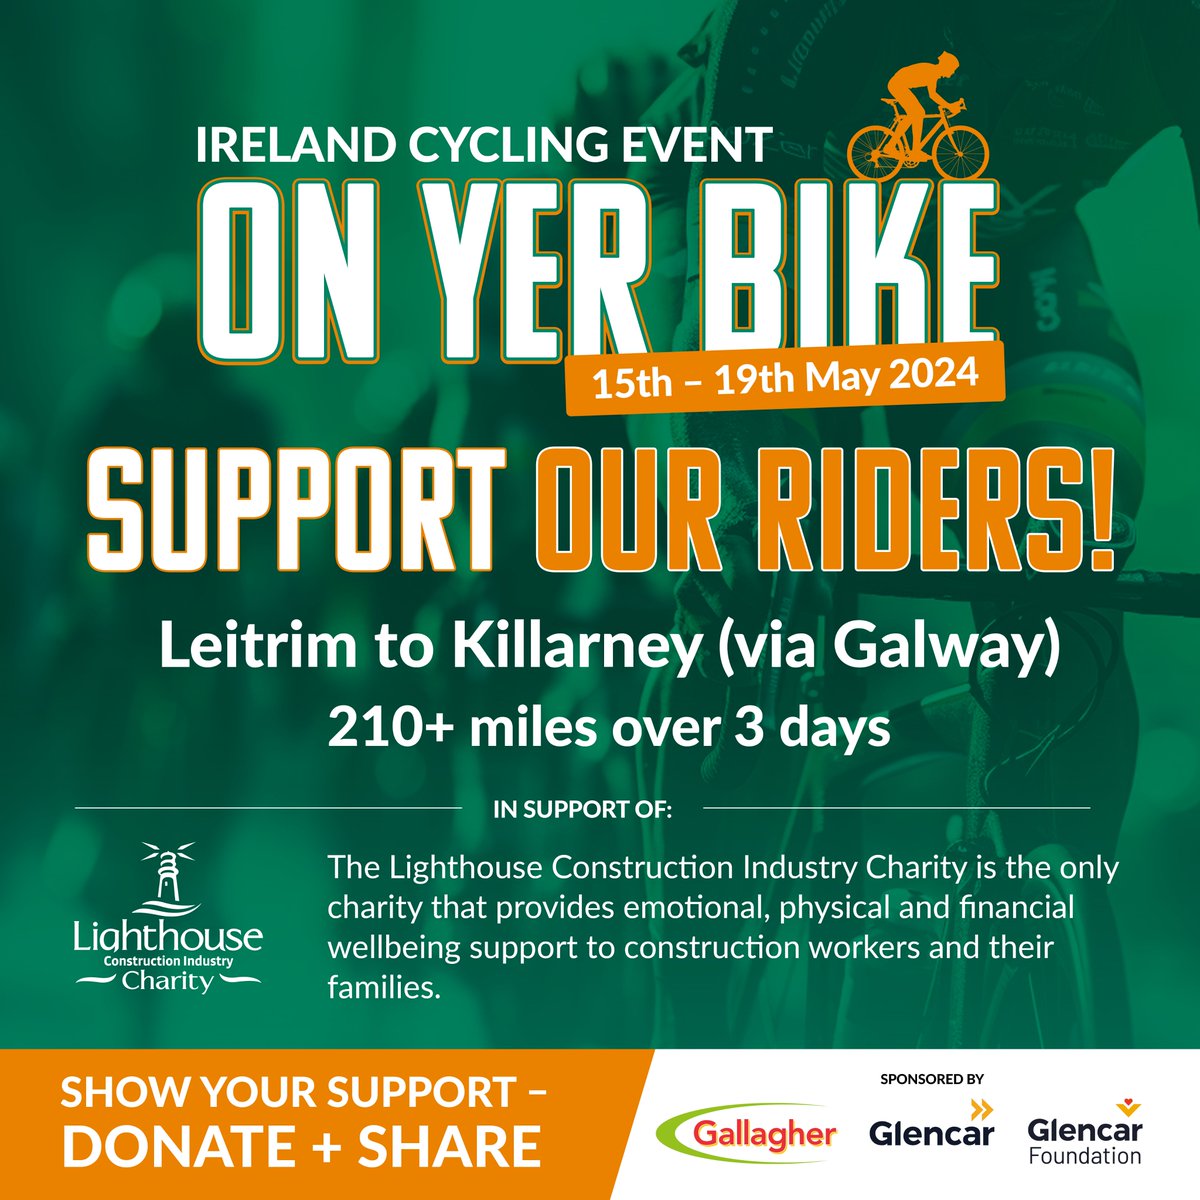 Join us in supporting our committed cyclists as they gear up to conquer 210 miles from Leitrim to Killarney in just three days raising money for @WeAreLHCharity  bit.ly/GallagherOYB

 #cyclechallenge #lighthouseclub #gallaghergroup #ExcellenceDelivered #charitycycle🚴